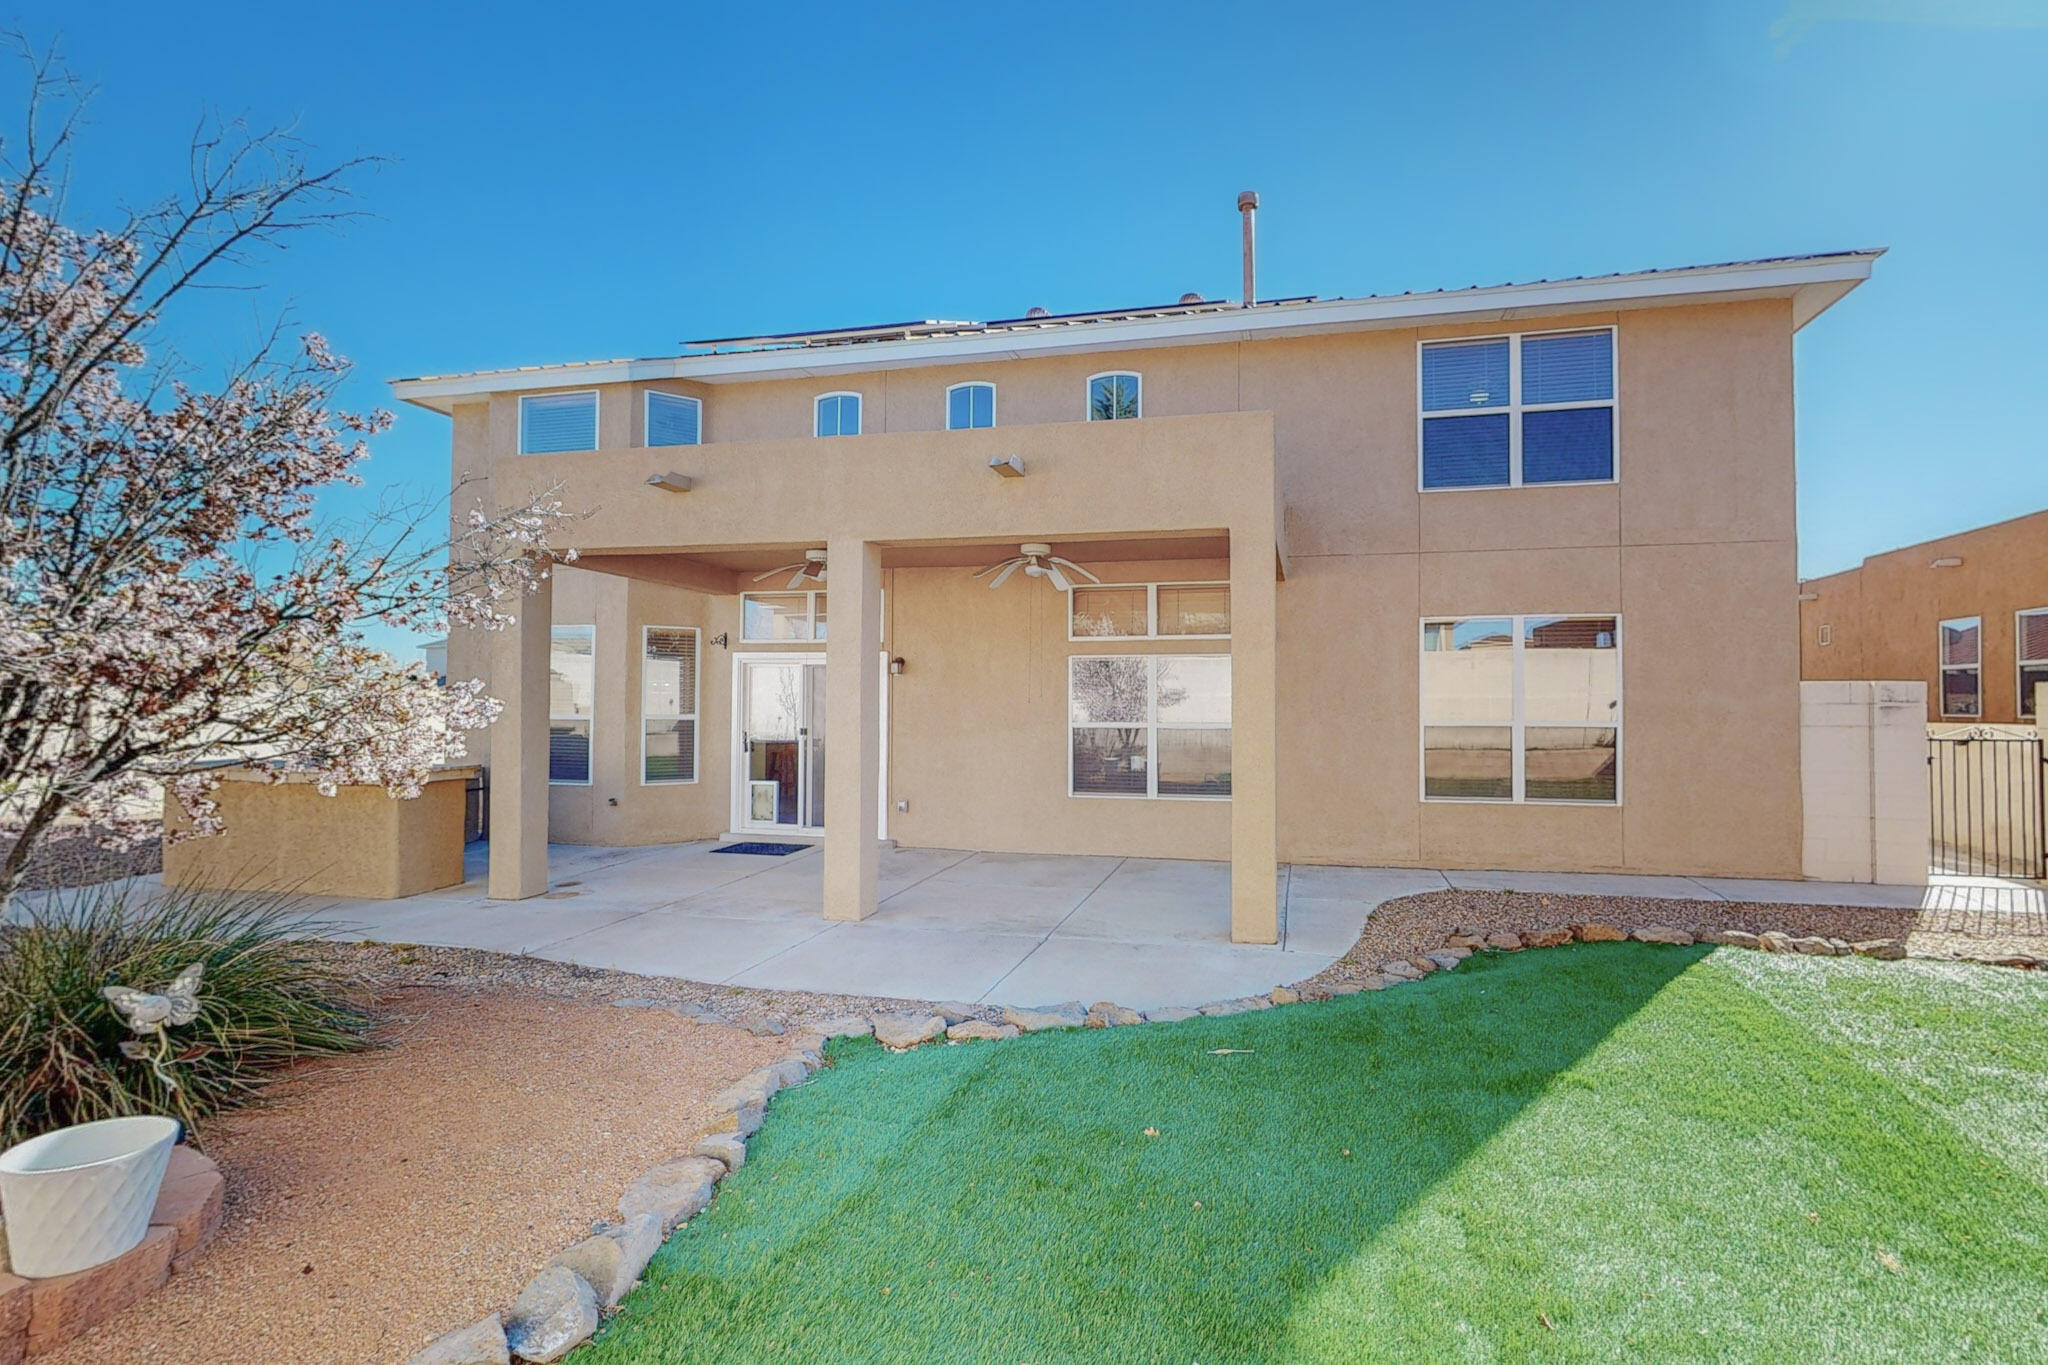 7269 Assisi Hills Road NE, Rio Rancho, New Mexico 87144, 4 Bedrooms Bedrooms, ,4 BathroomsBathrooms,Residential,For Sale,7269 Assisi Hills Road NE,1059632